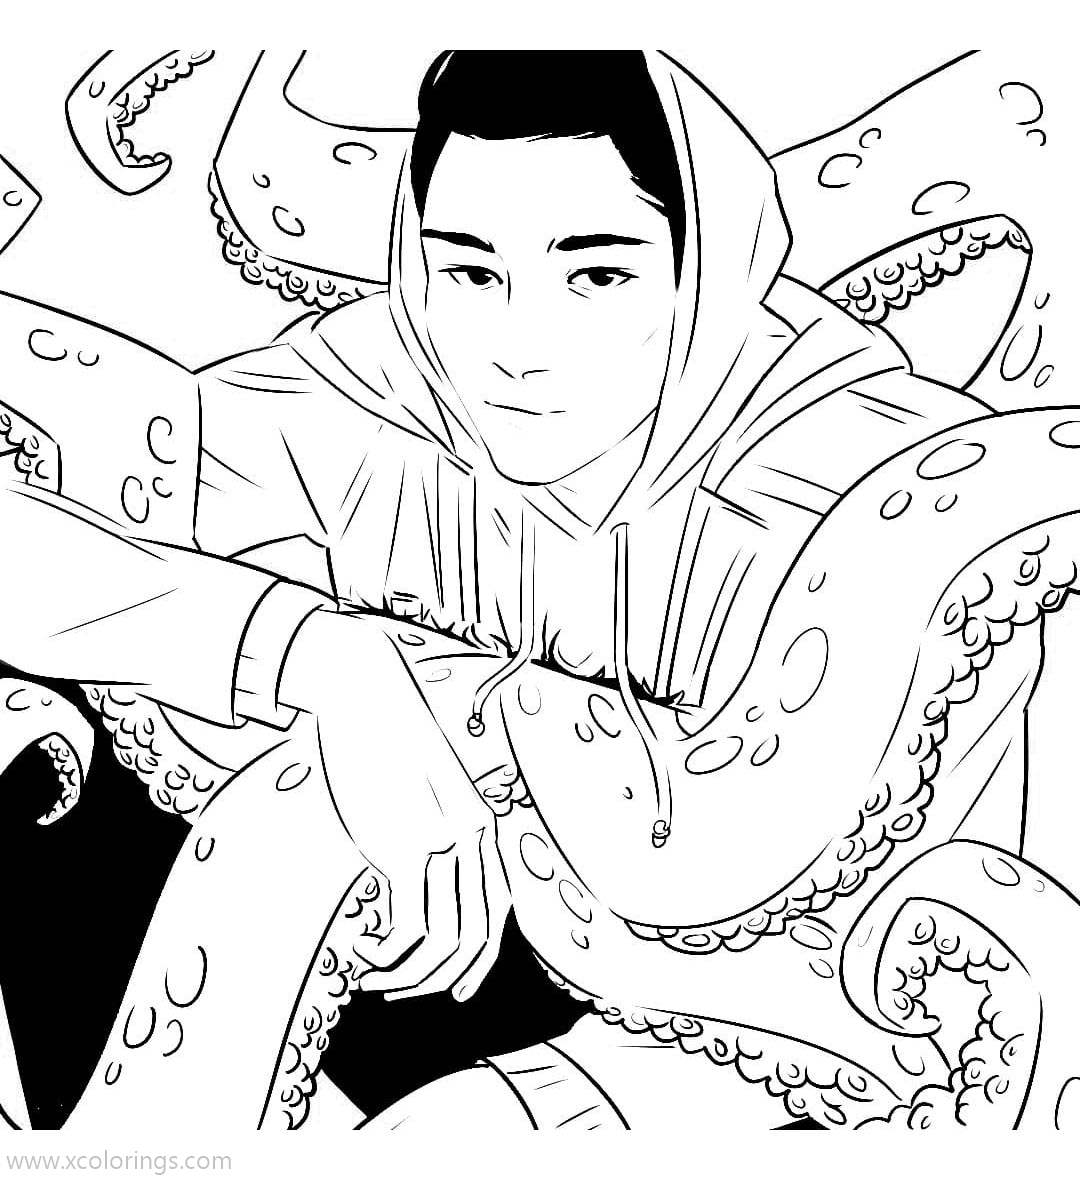 Free Umbrella Academy Coloring Pages Ability to Summon and Control Enormous Tentacles printable